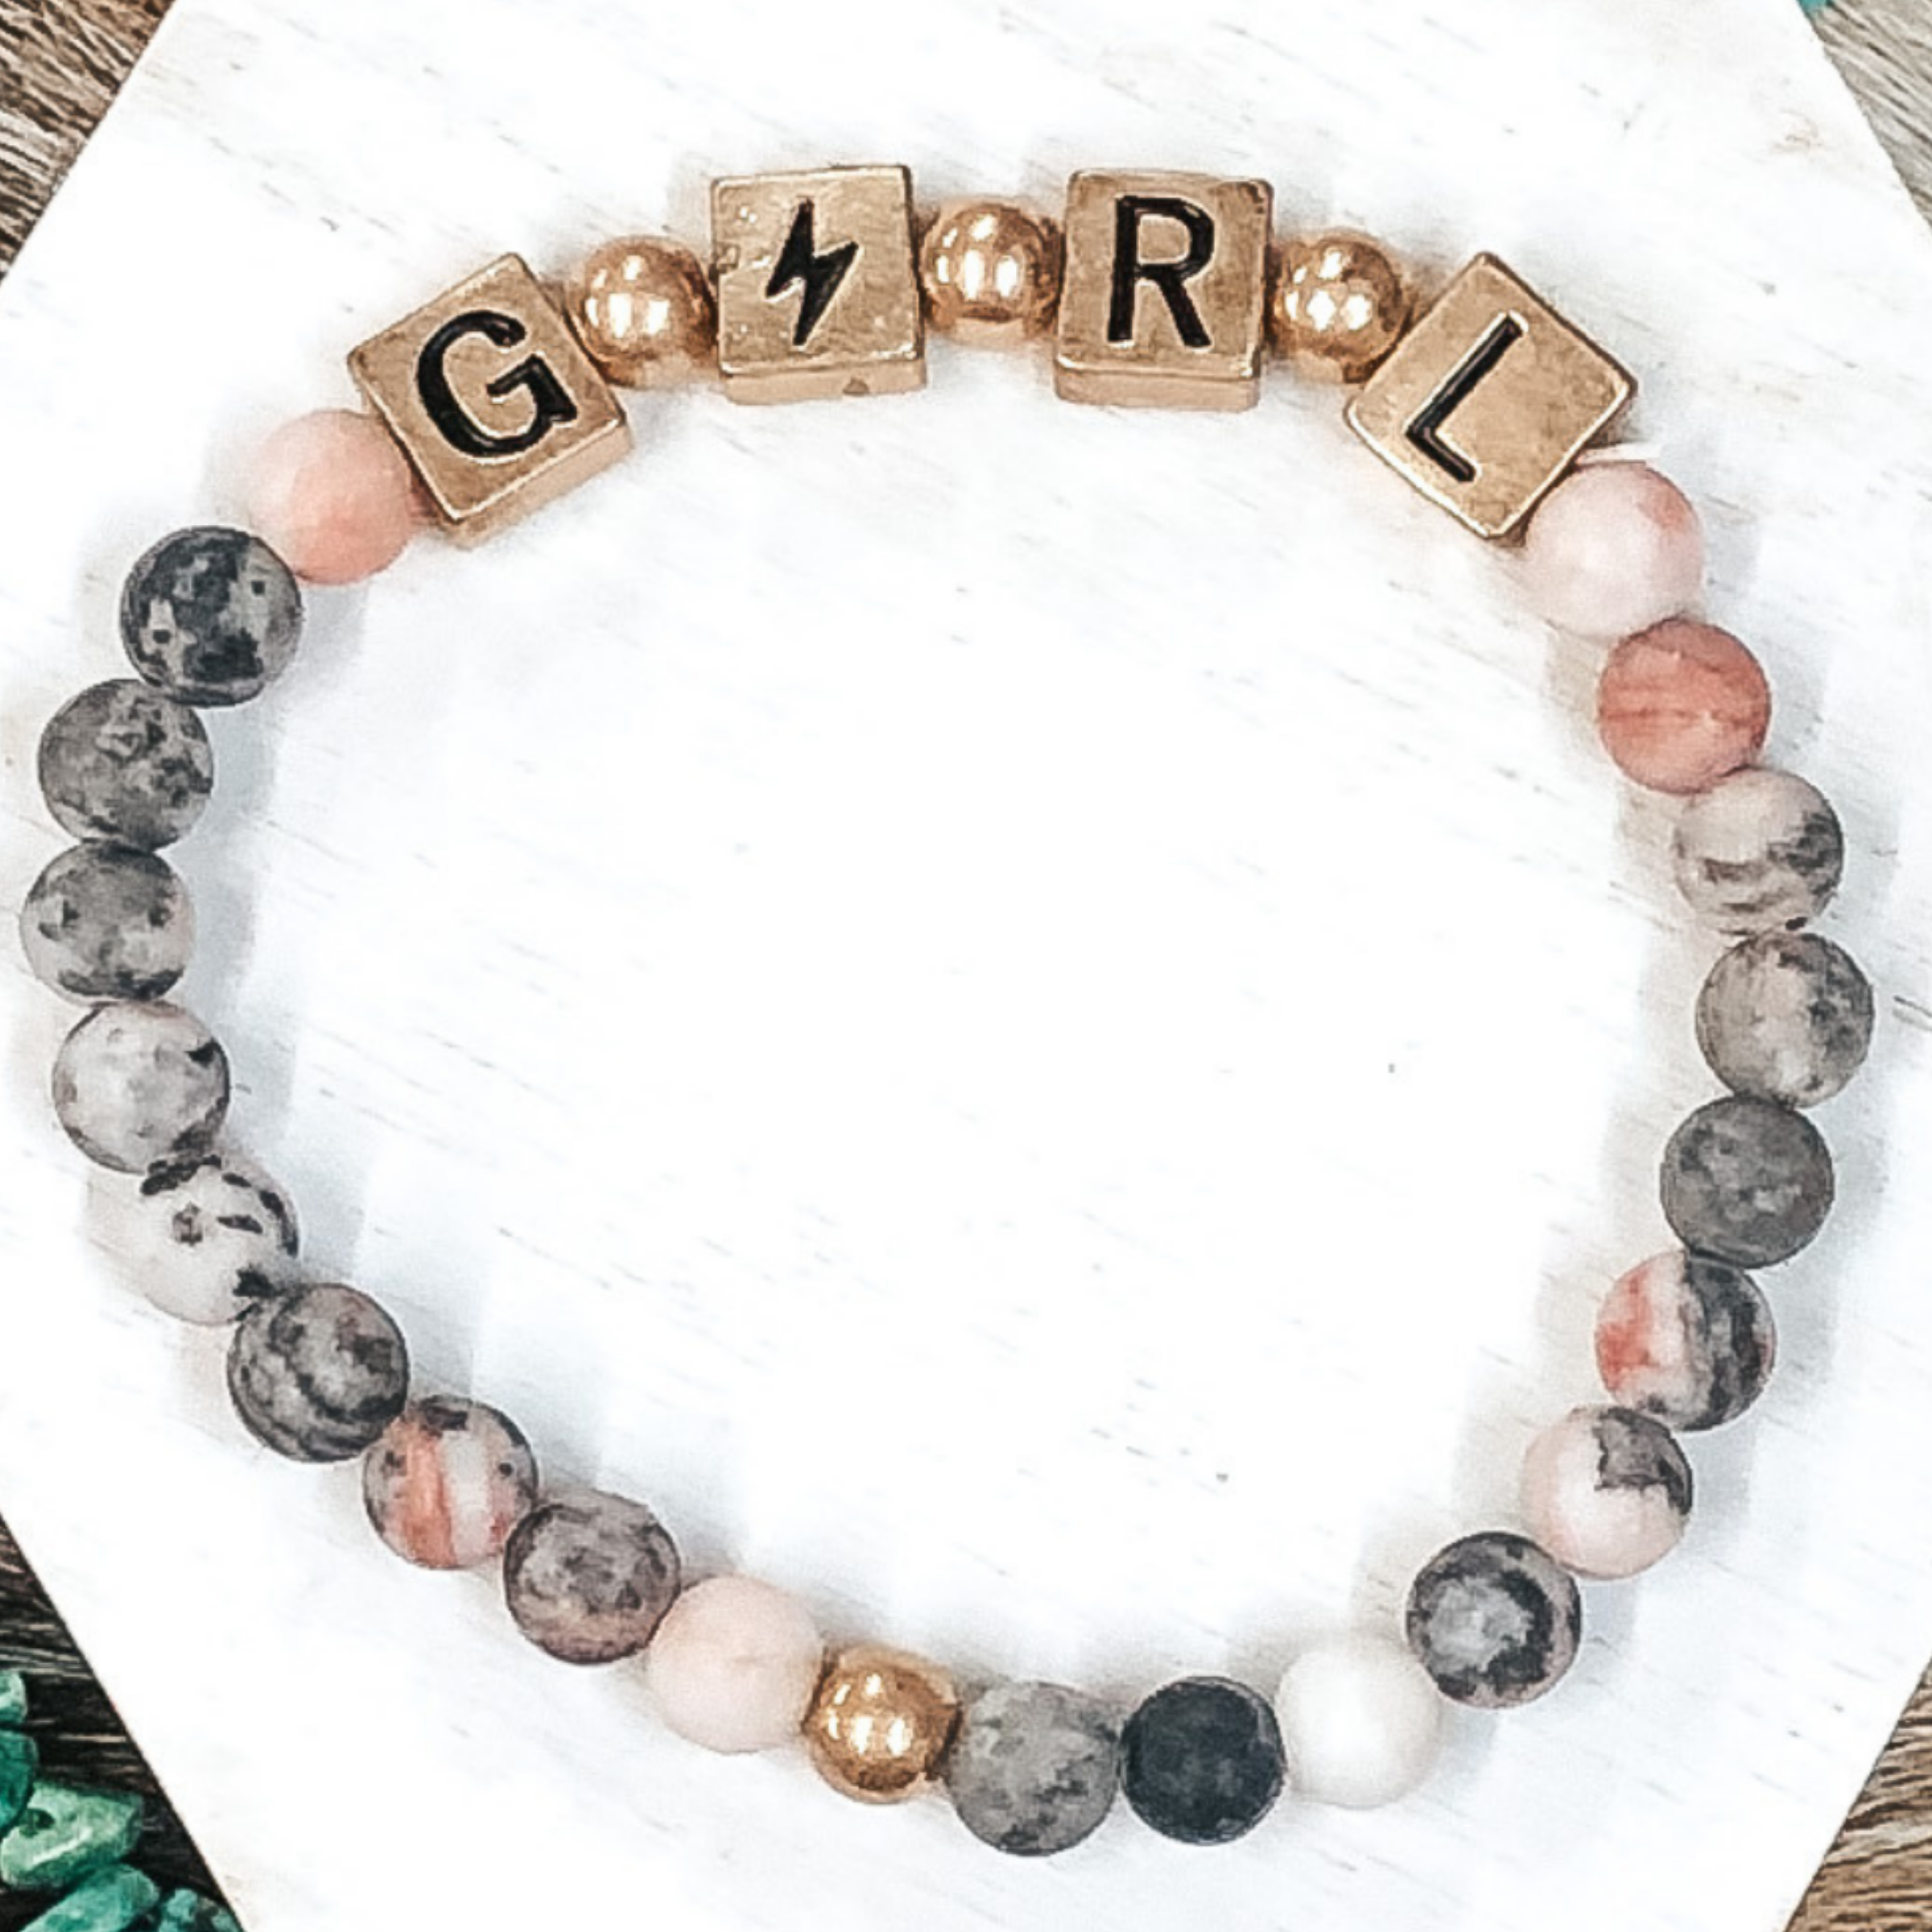 Girl Power Bracelet in Pink Marble - Giddy Up Glamour Boutique